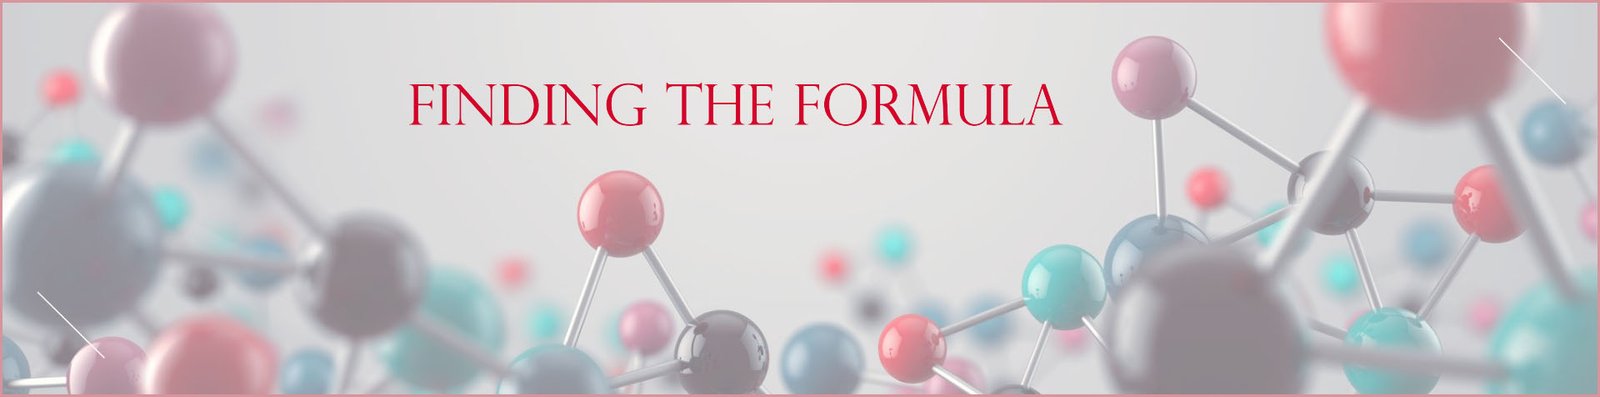 finding the formula